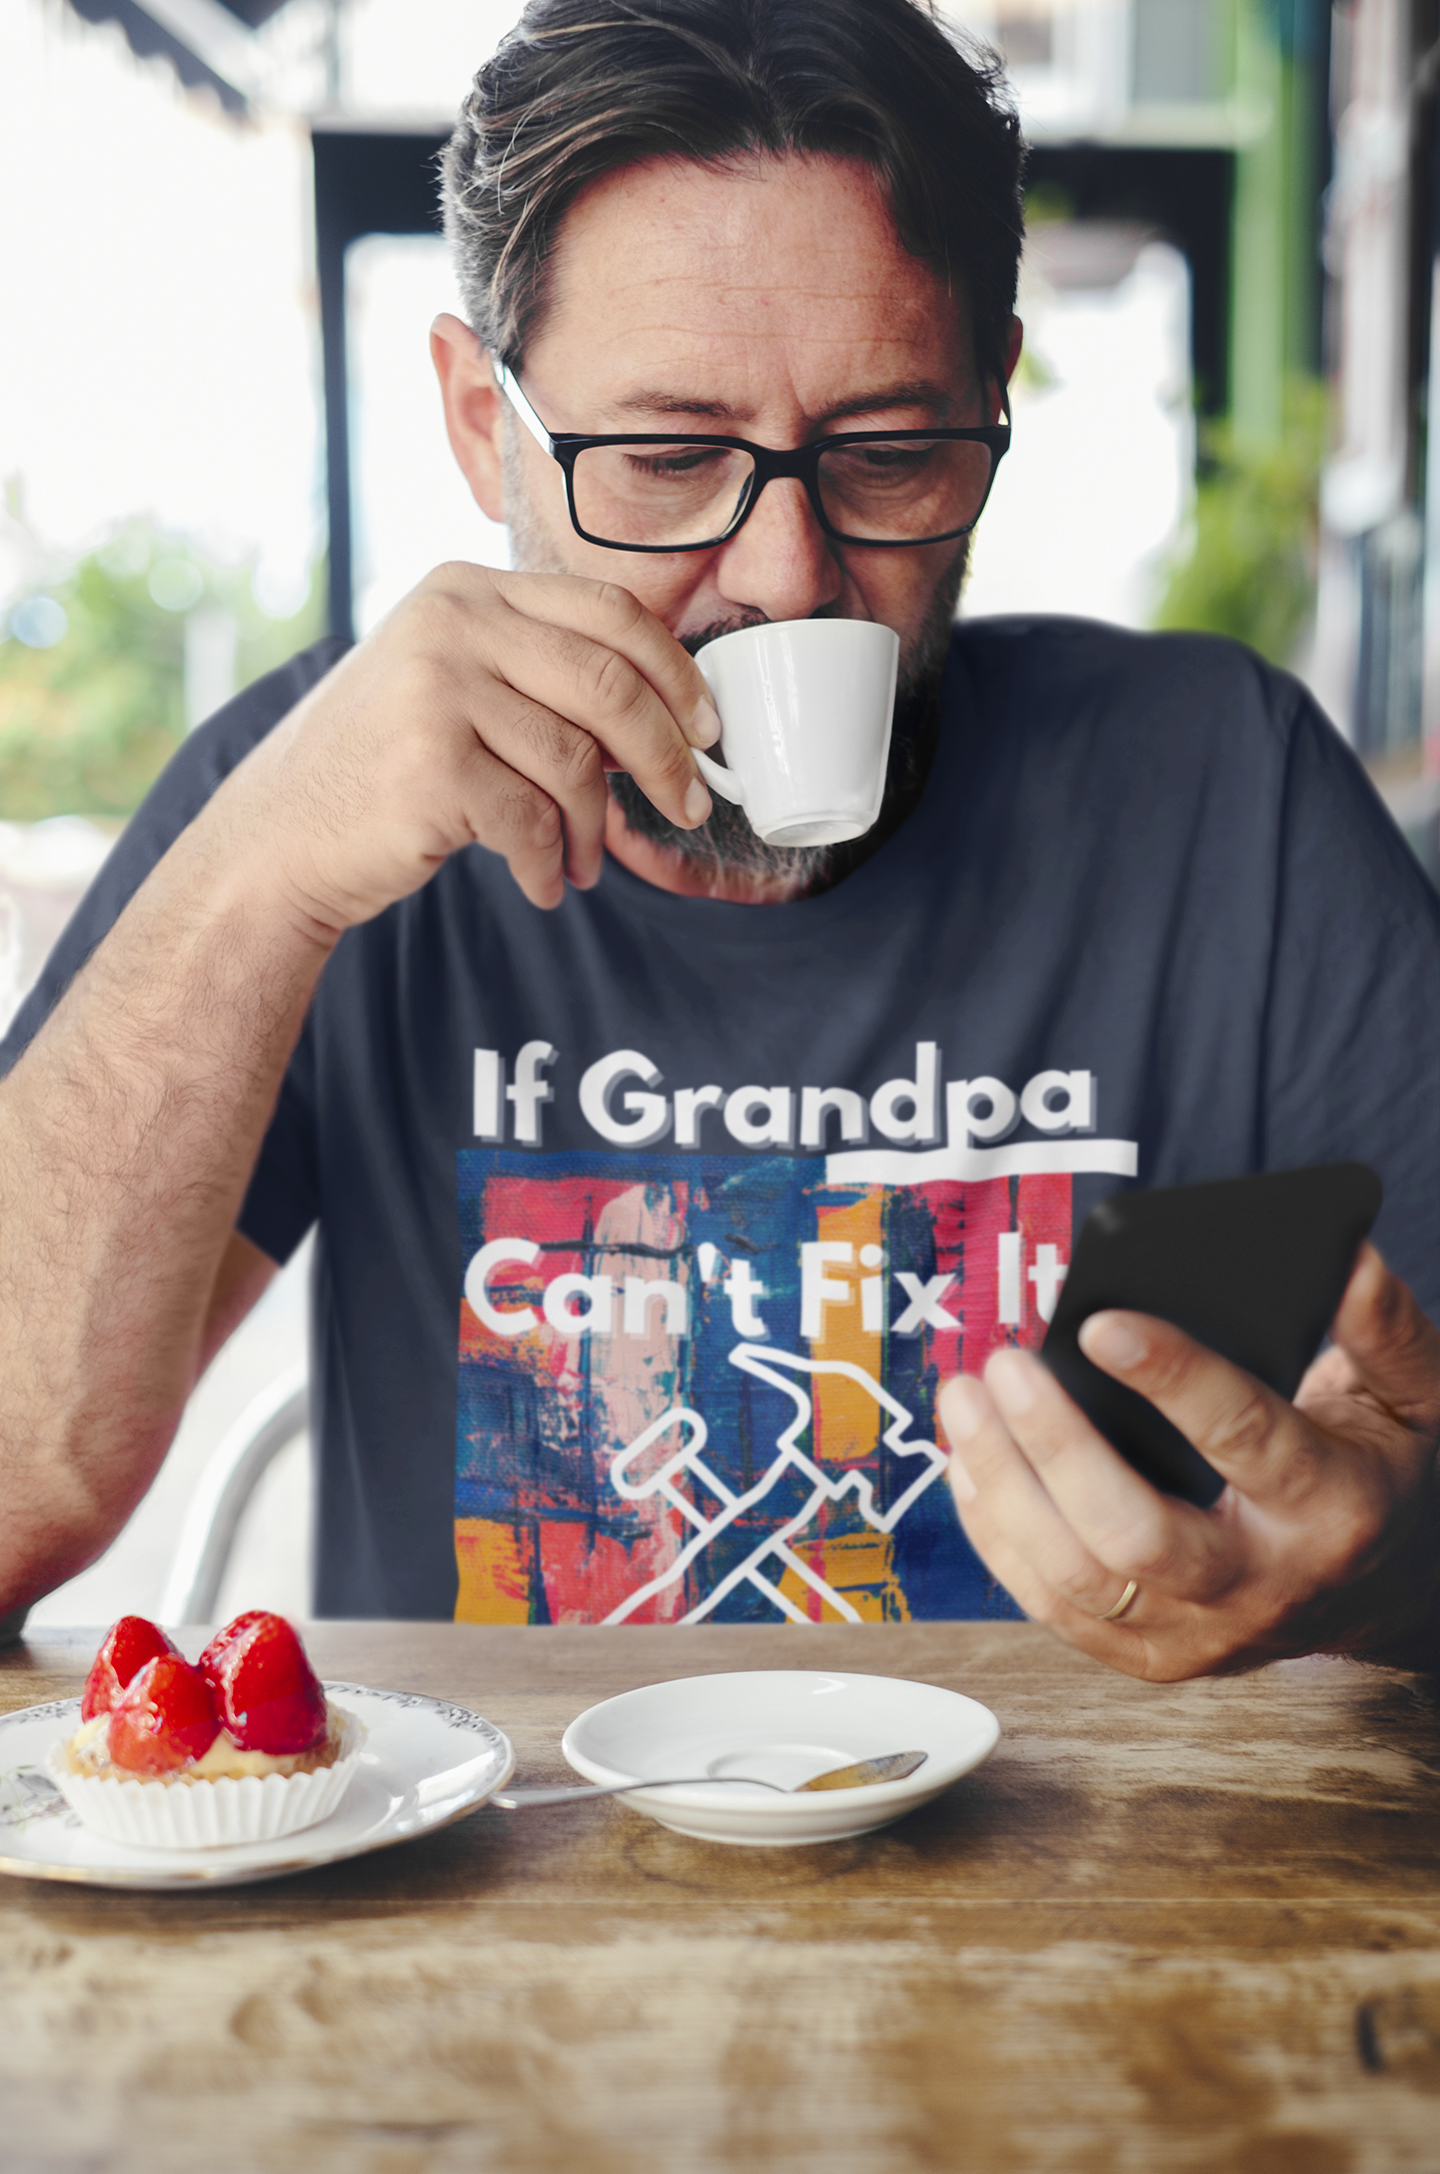 https://www.candidpot.com/products/if-grandpa-cant-fix-it-were-all-screwed-shirt-funny-shirt-men-gift-for-grandpa-fathers-day-shirt-grandpa-shirt-dad-gift-funny-tshirt-unisex-heavy-cotton-tee